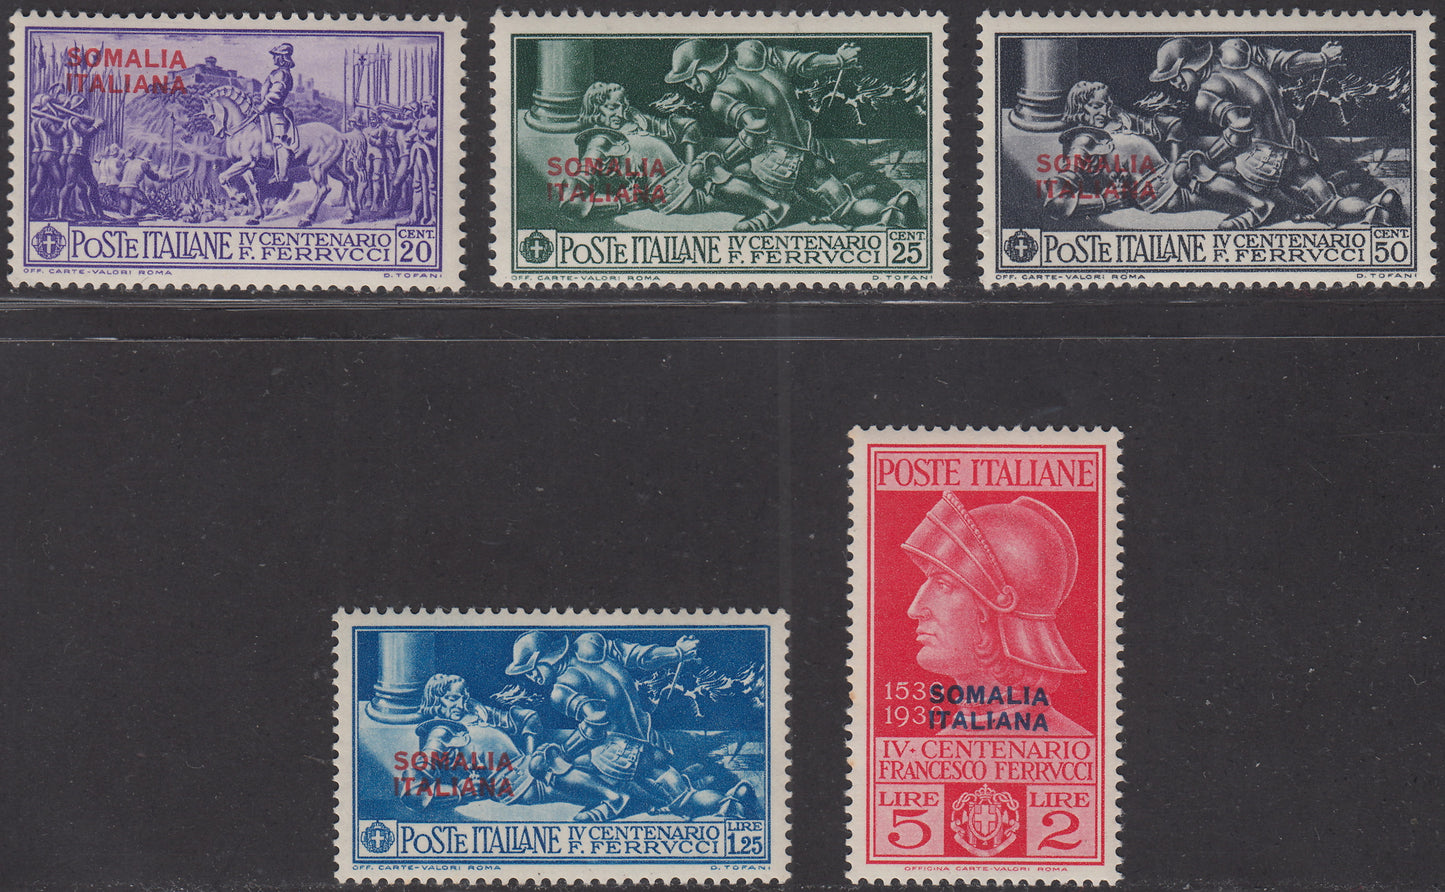 SOM29 - 1930 - Ferrucci, stamps in changed colors and overprinted SOMALIA ITALIANA, complete set new intact rubber (133/137) 